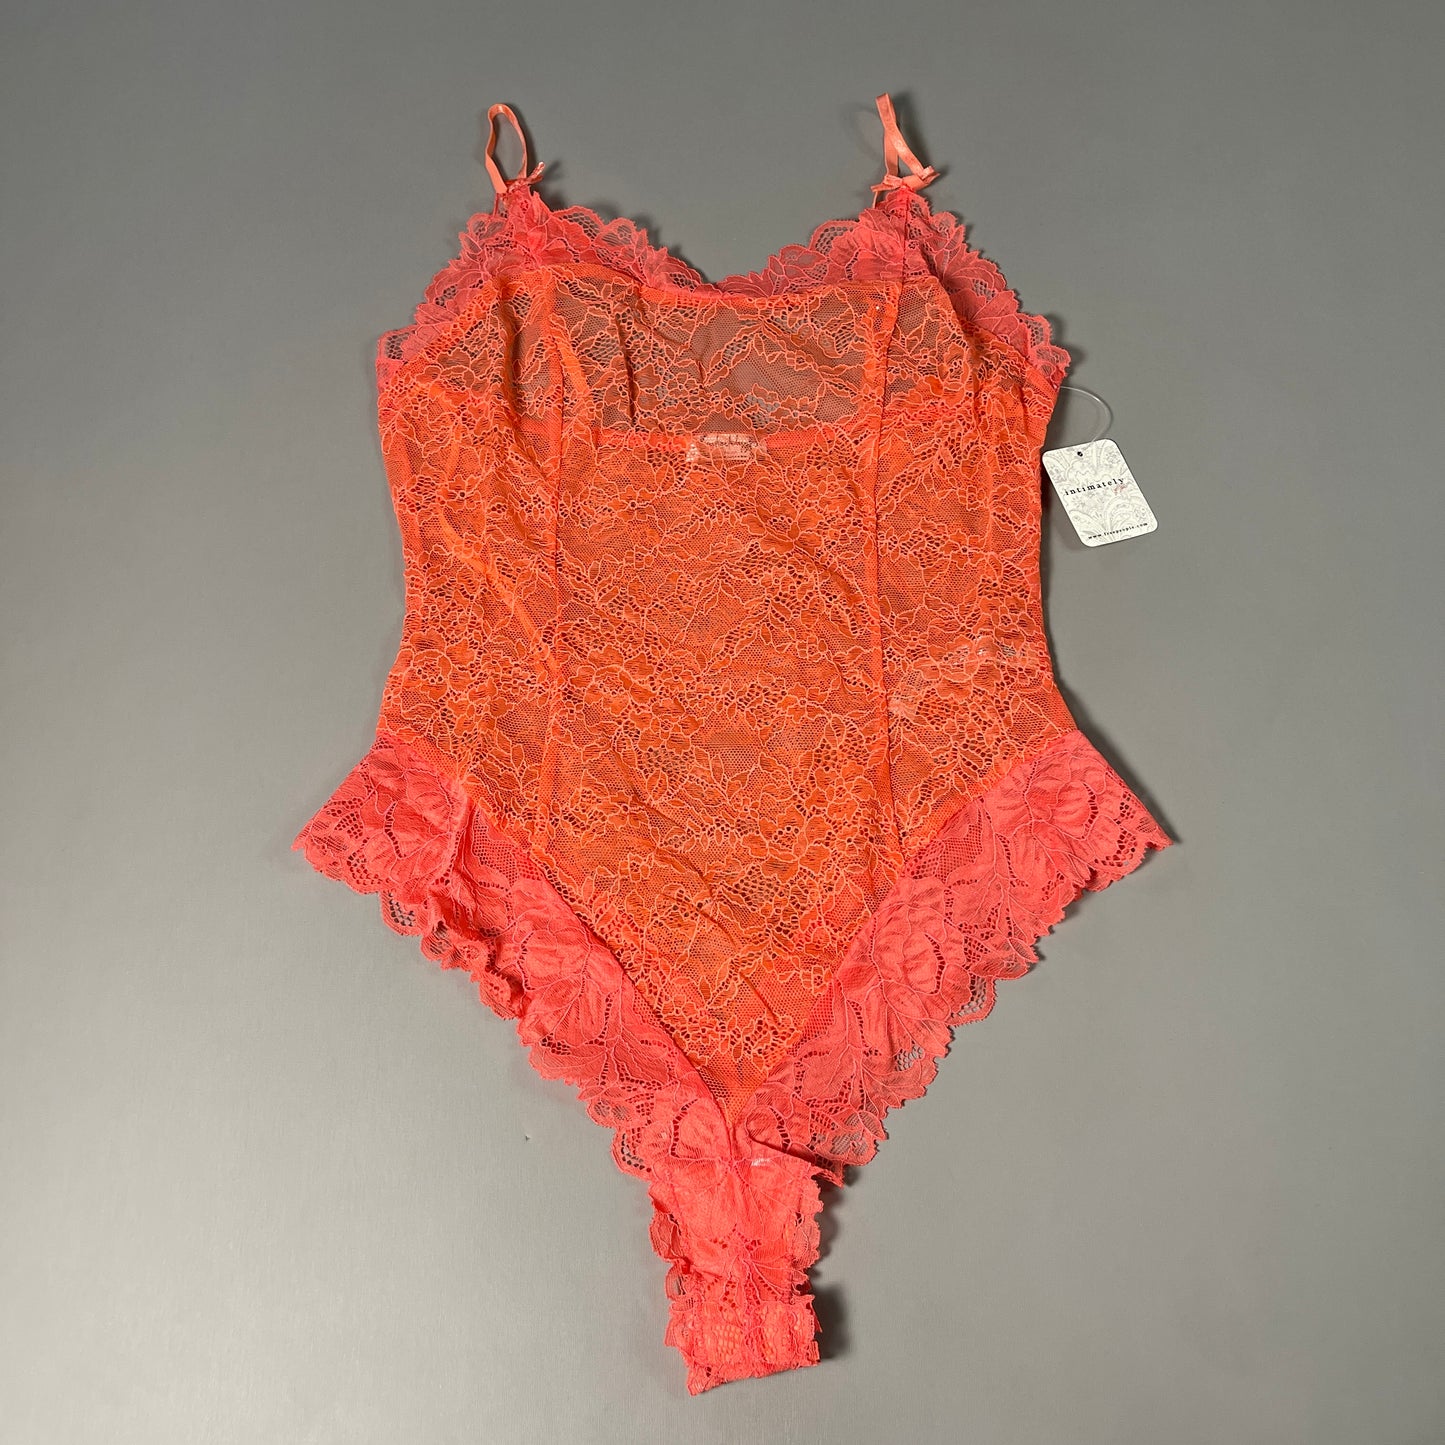 FREE PEOPLE Sheer One Touch Bodysuit Leotard Women's Sz S Watermelon Lace OB1457989 (New)